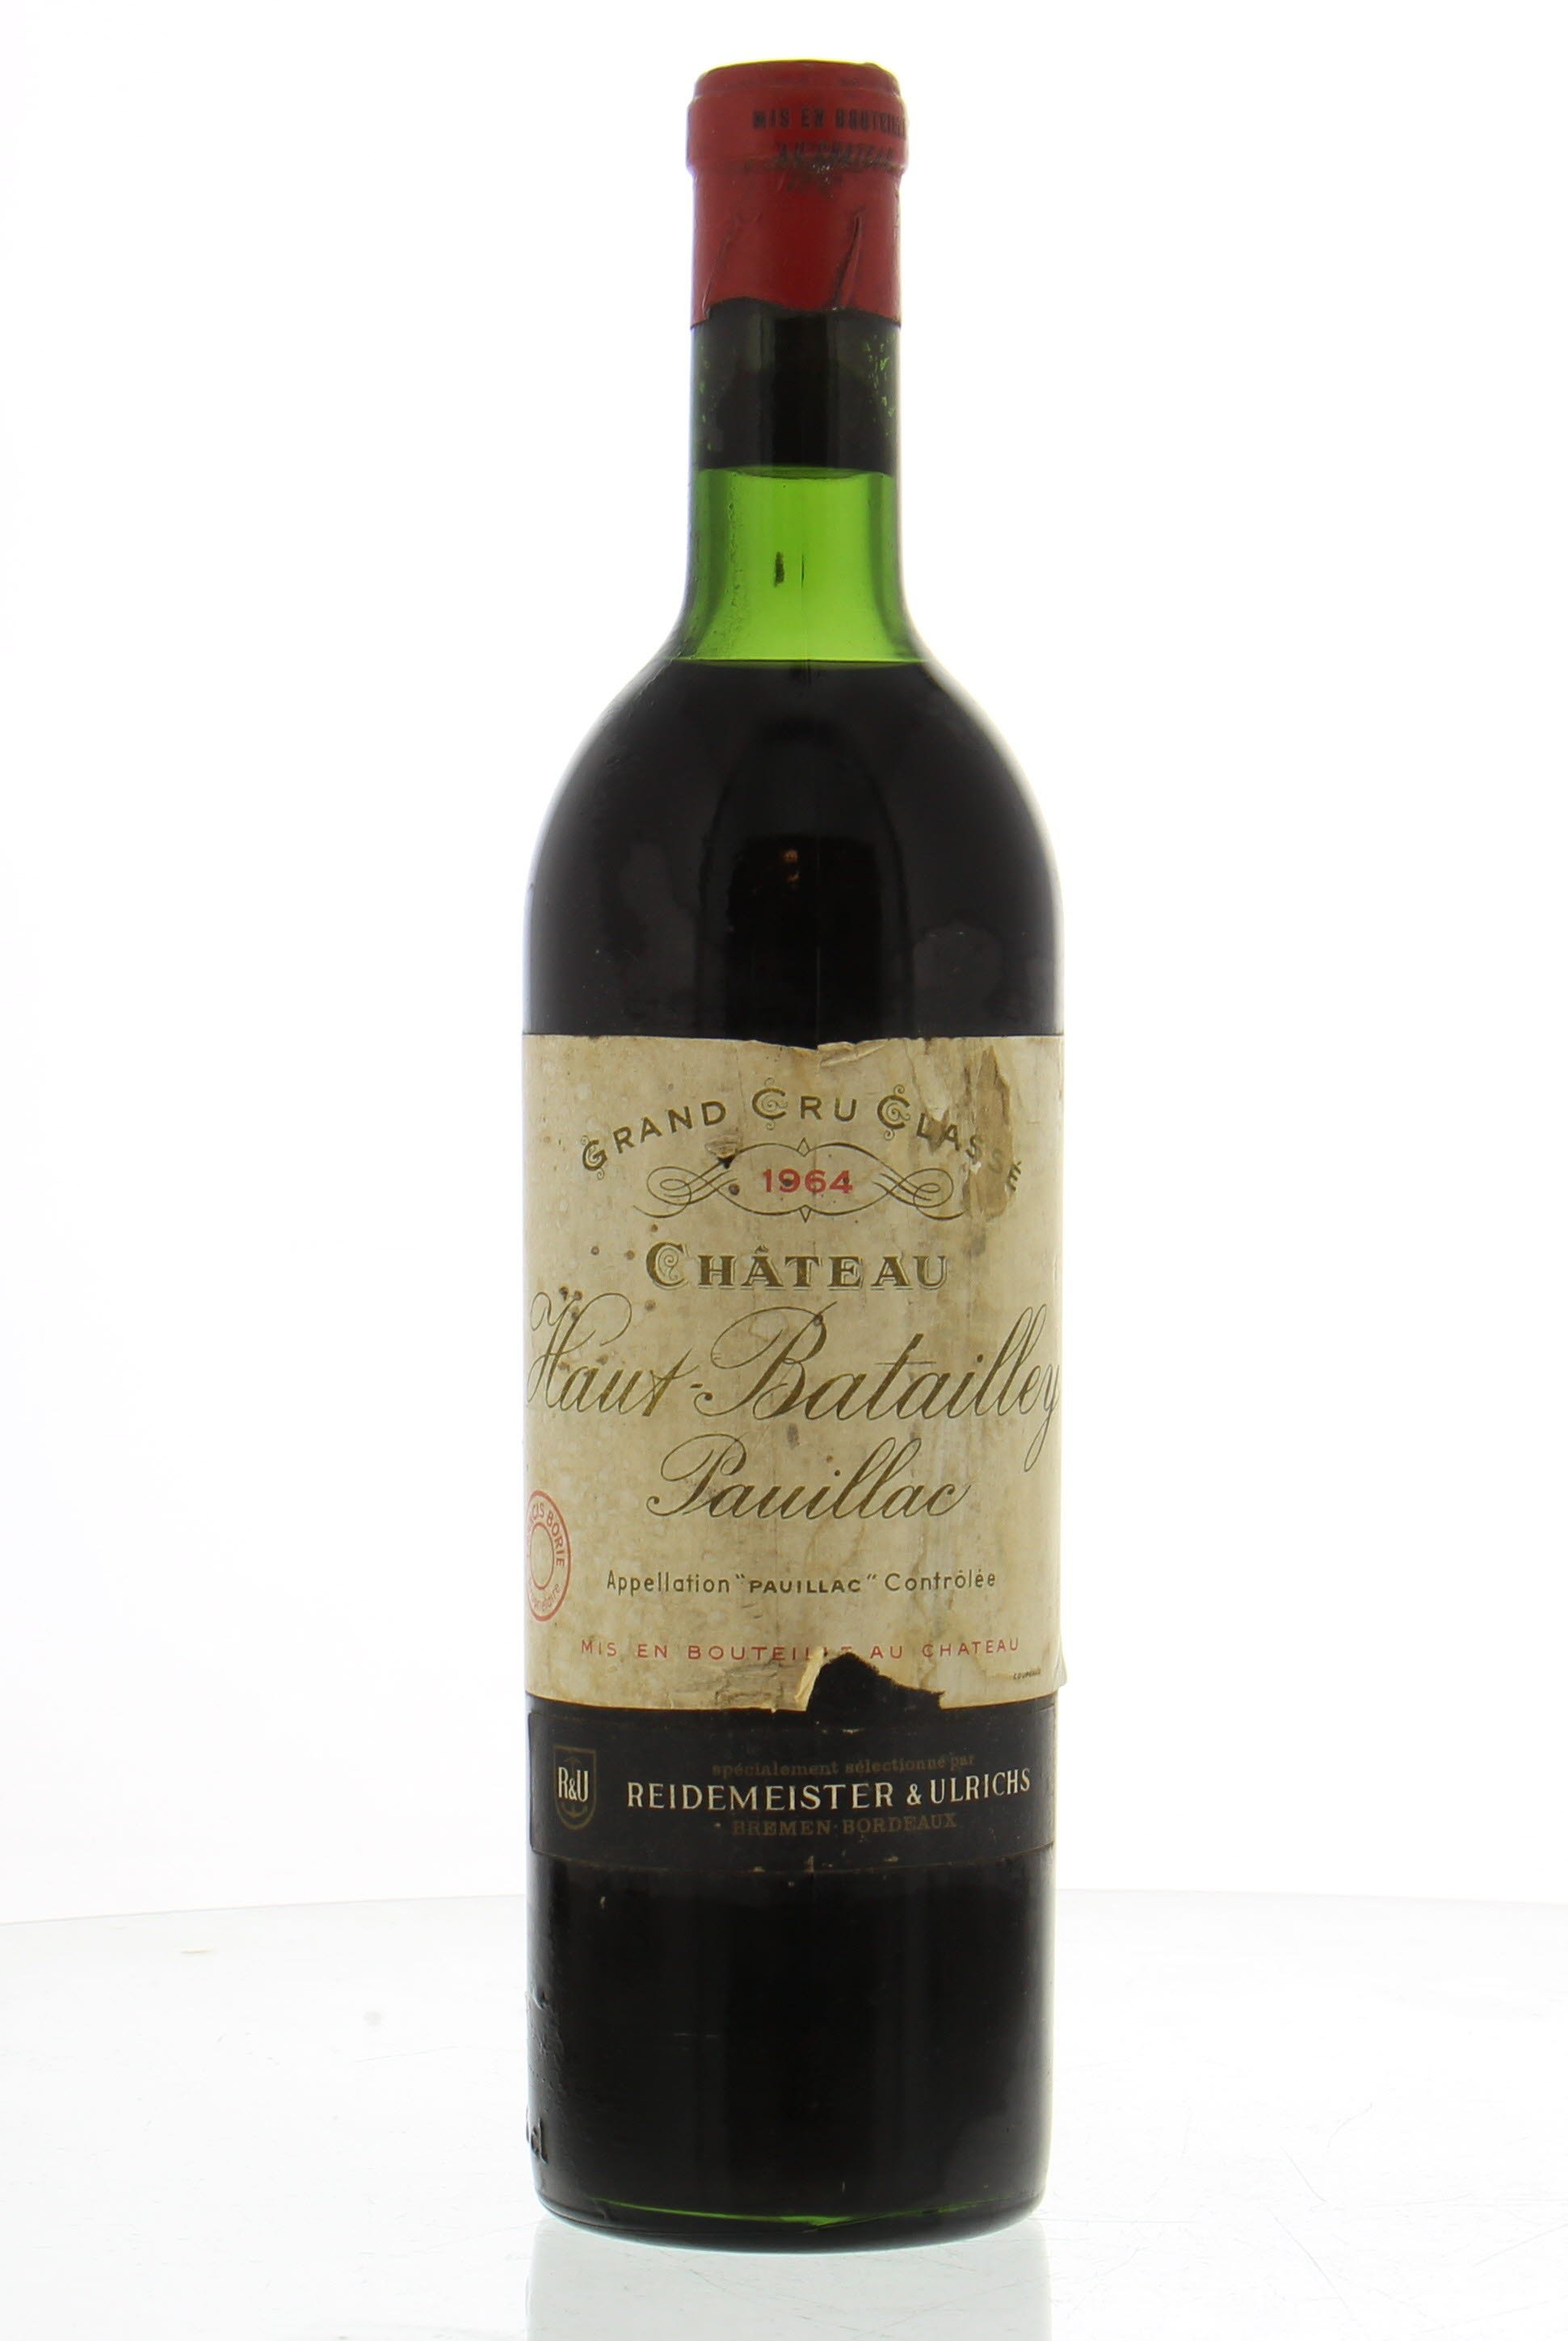 Chateau Batailley - Chateau Batailley 1964